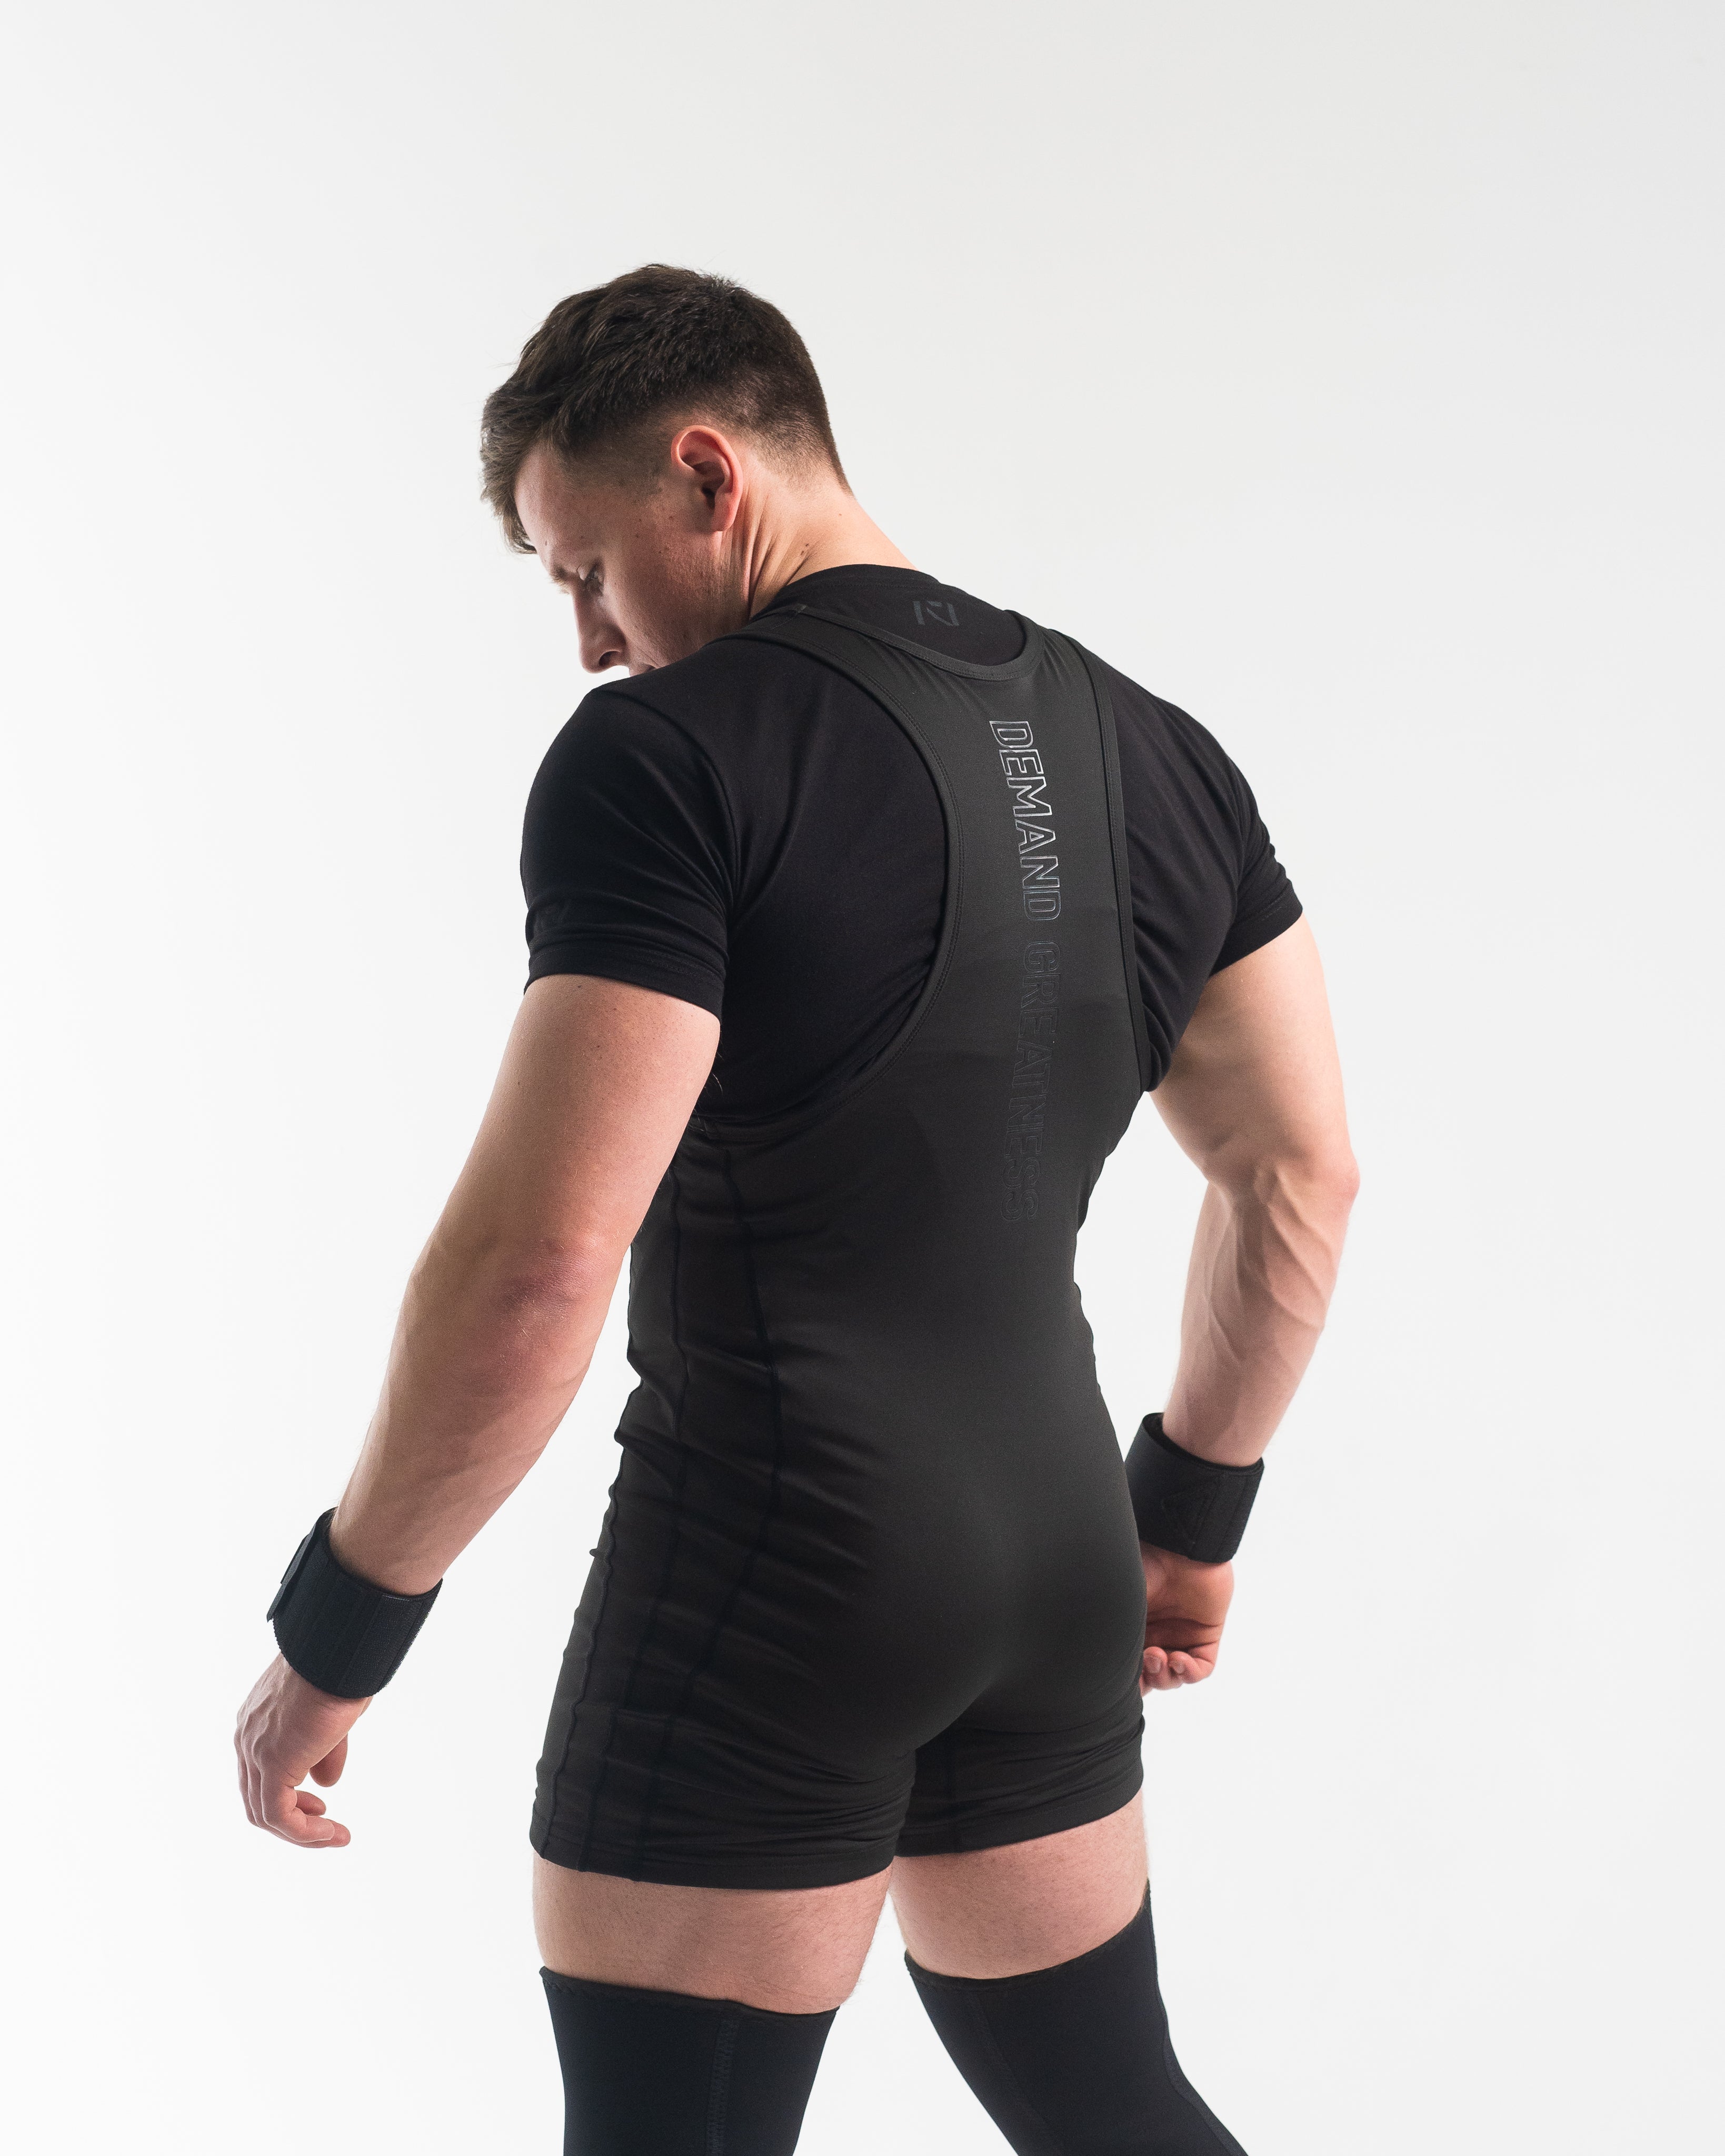 Singlets - IPF Approved – A7 EUROPE